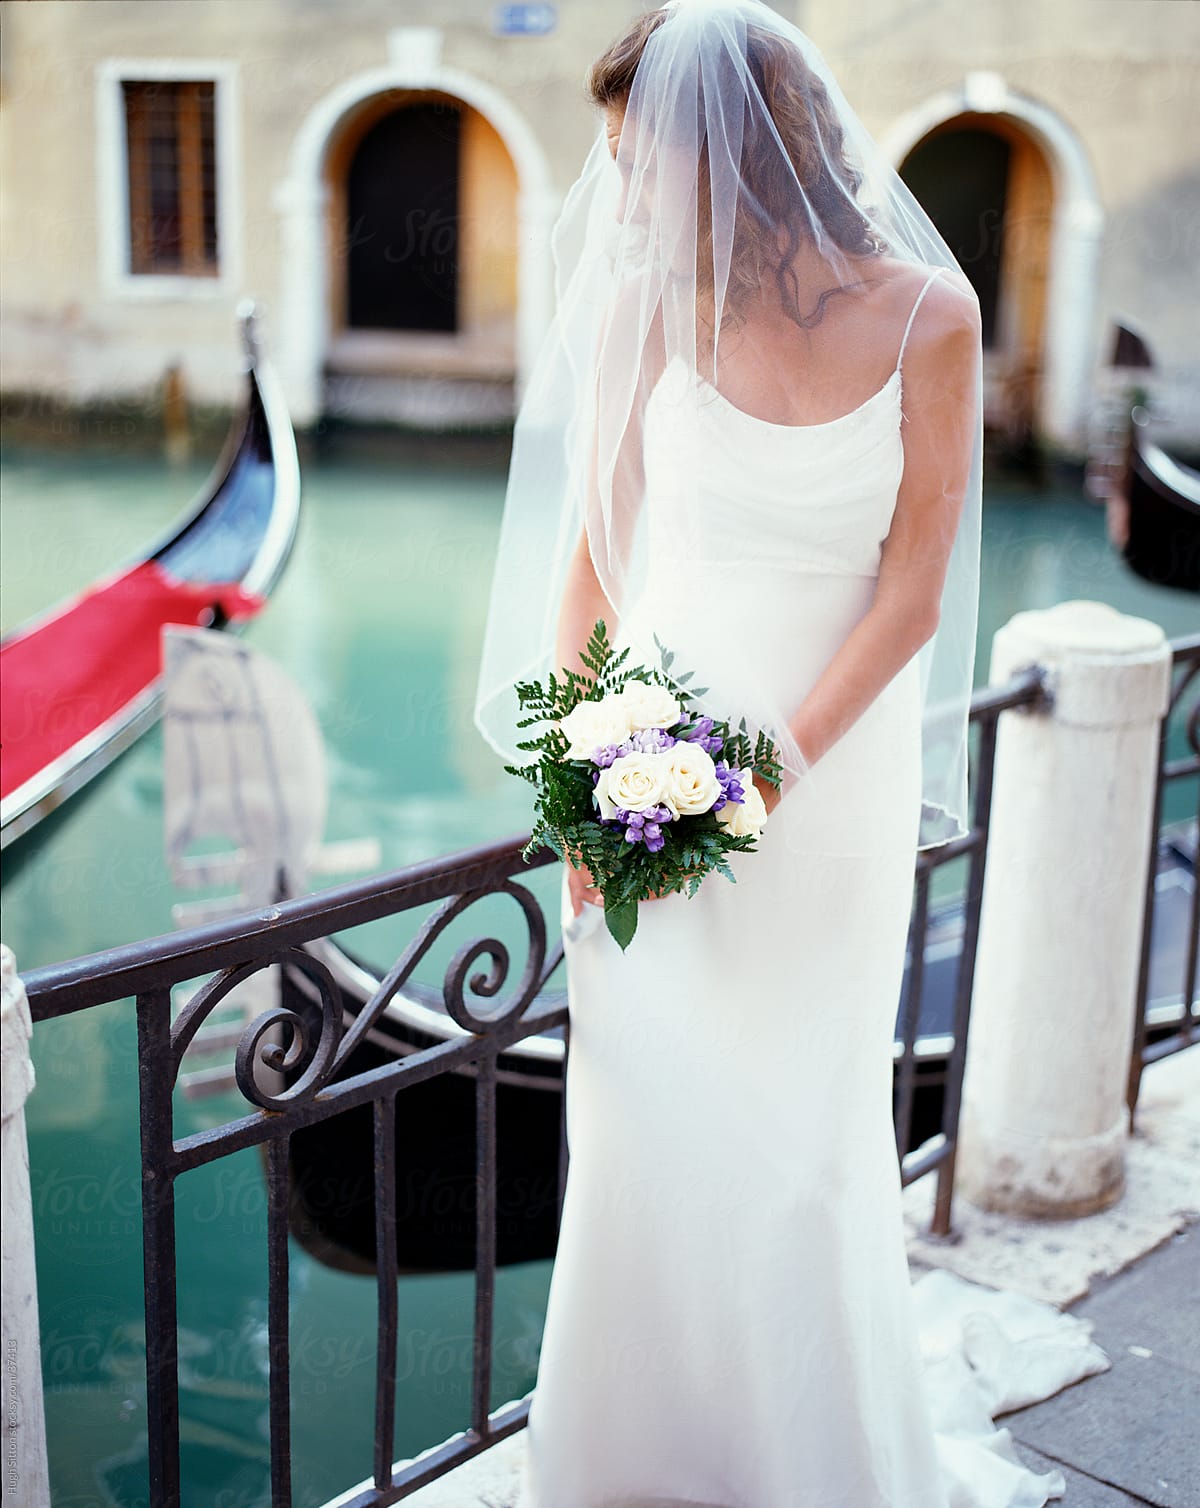 Bride in wedding dress standing next to the canals of Venice.